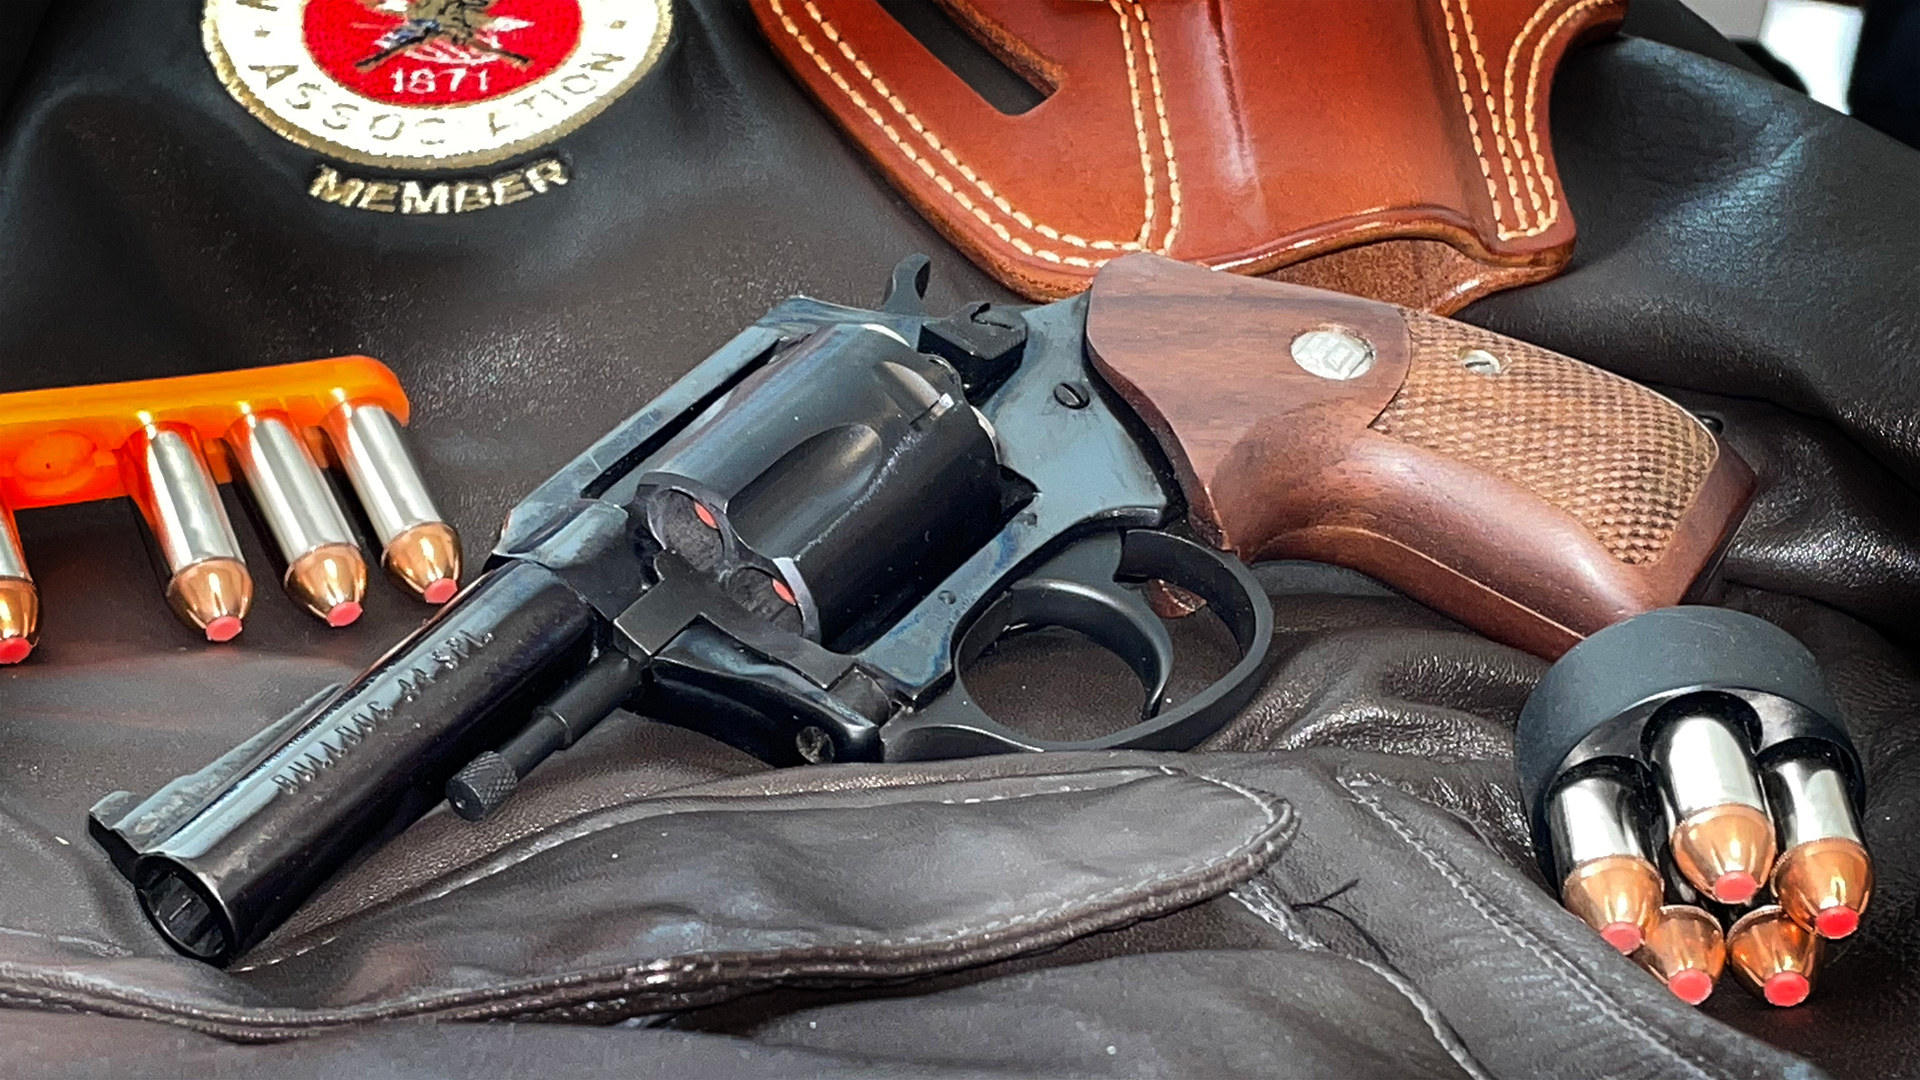 II. Factors to Consider when Choosing a Holster for Vintage or Collector's Firearms